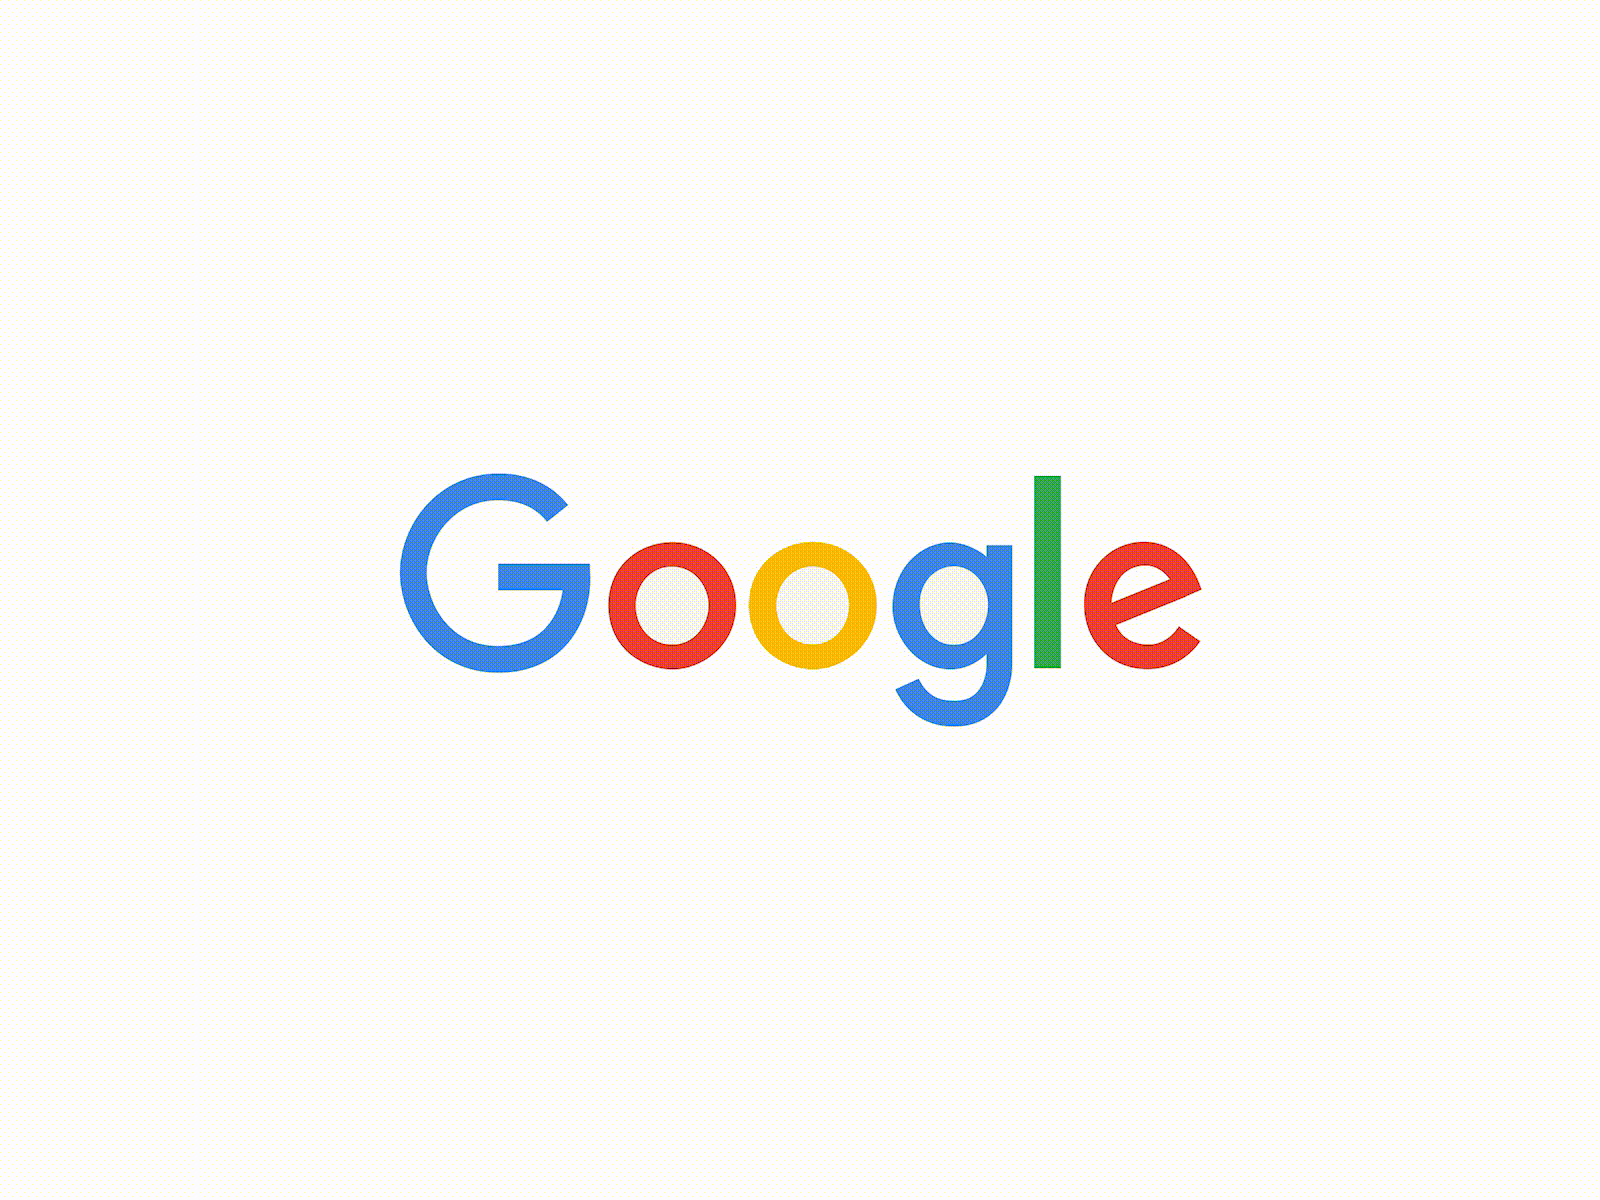 Google logo animation - Study after effects animation branding dots google google logo animation logo logo animation logo reveal motion